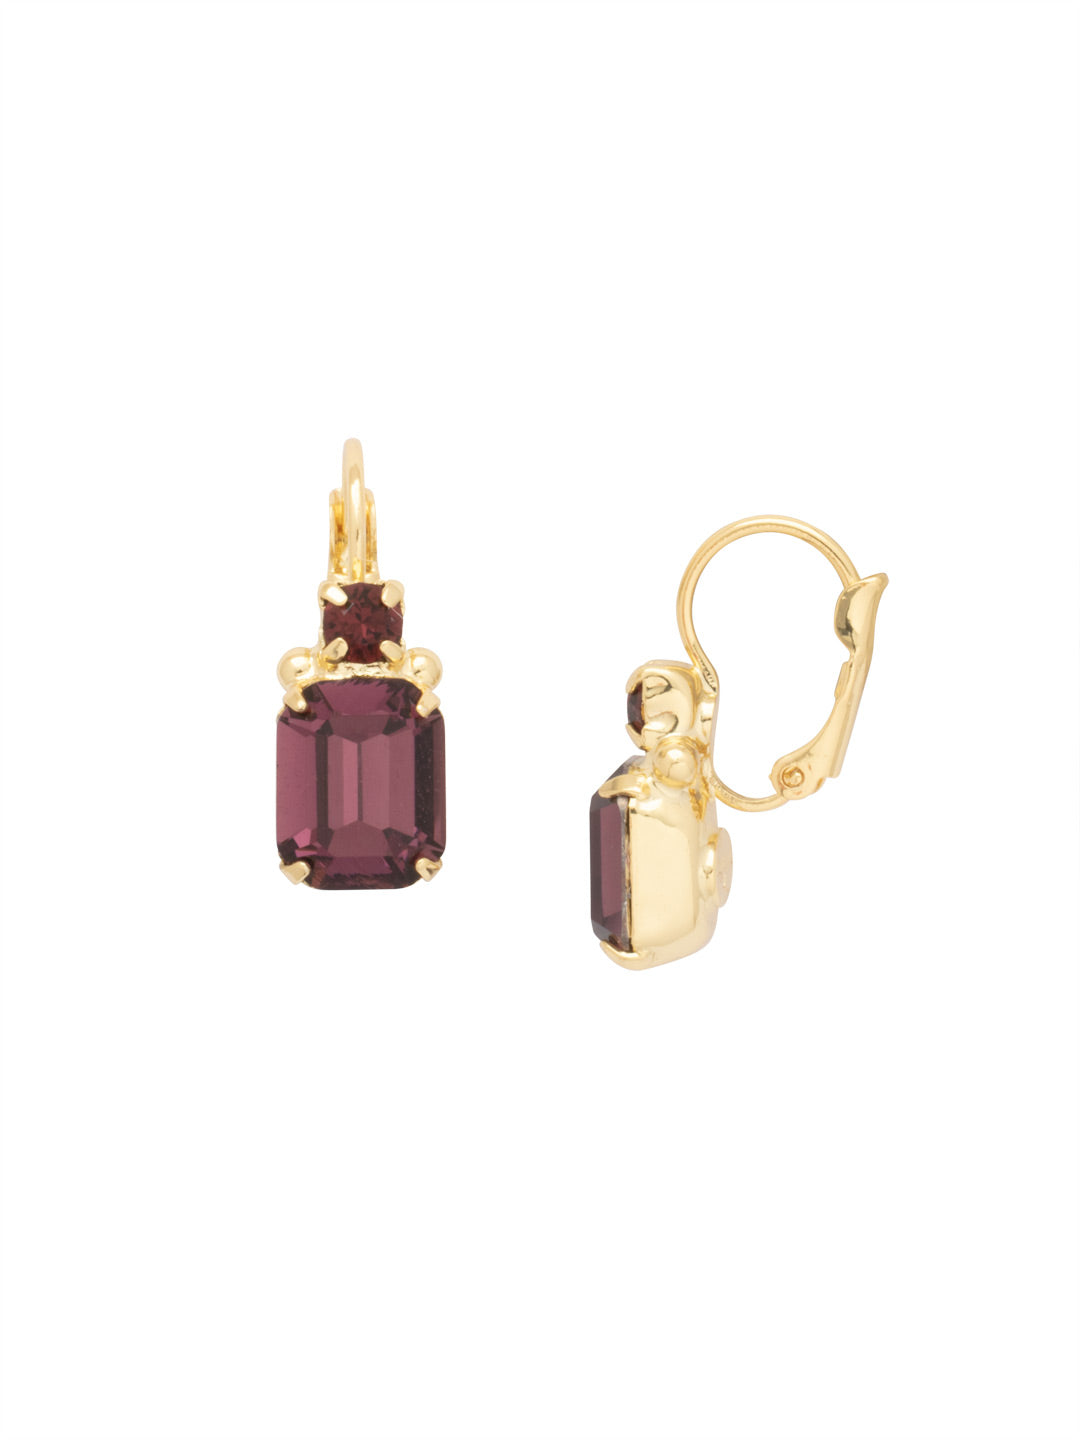 Octavia Studded Dangle Earrings - EEA7BGMRL - <p>The Octavia Studded Dangle Earrings combine simplistic beauty and sparkle, featuring a cushion emerald cut crystal and accented by a small round crystal above. From Sorrelli's Merlot collection in our Bright Gold-tone finish.</p>